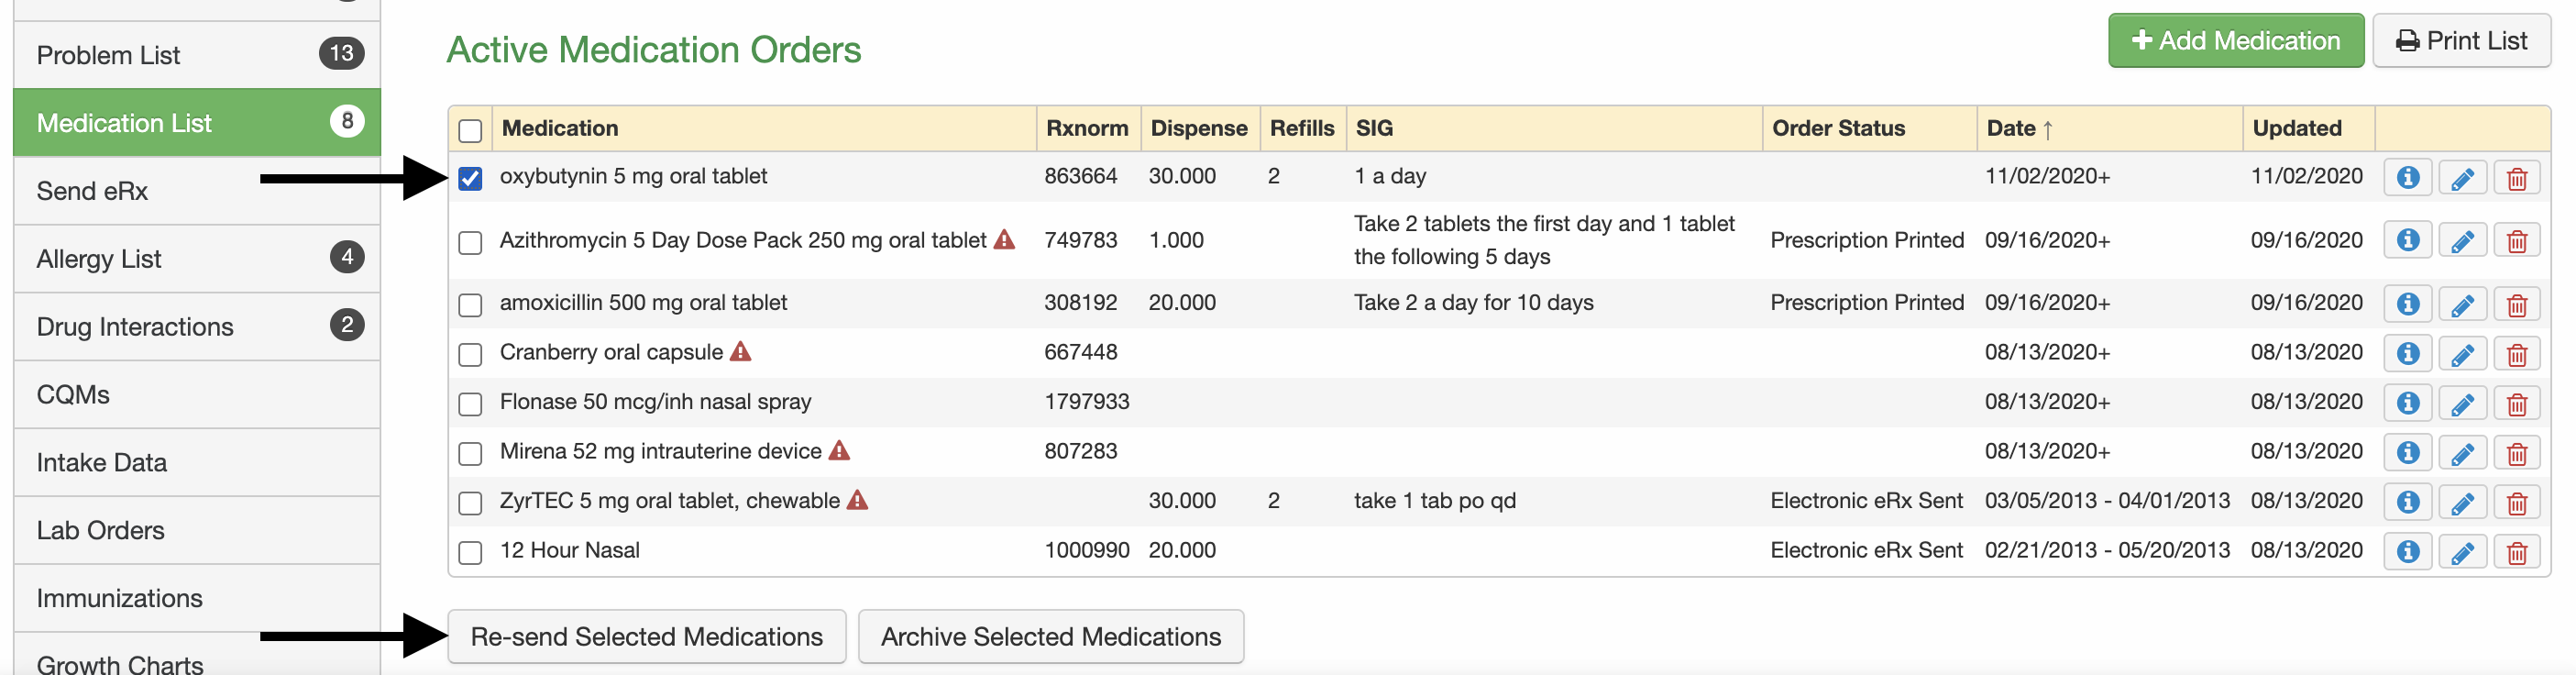 Medication_List_Med_Selected_and_Resend.png